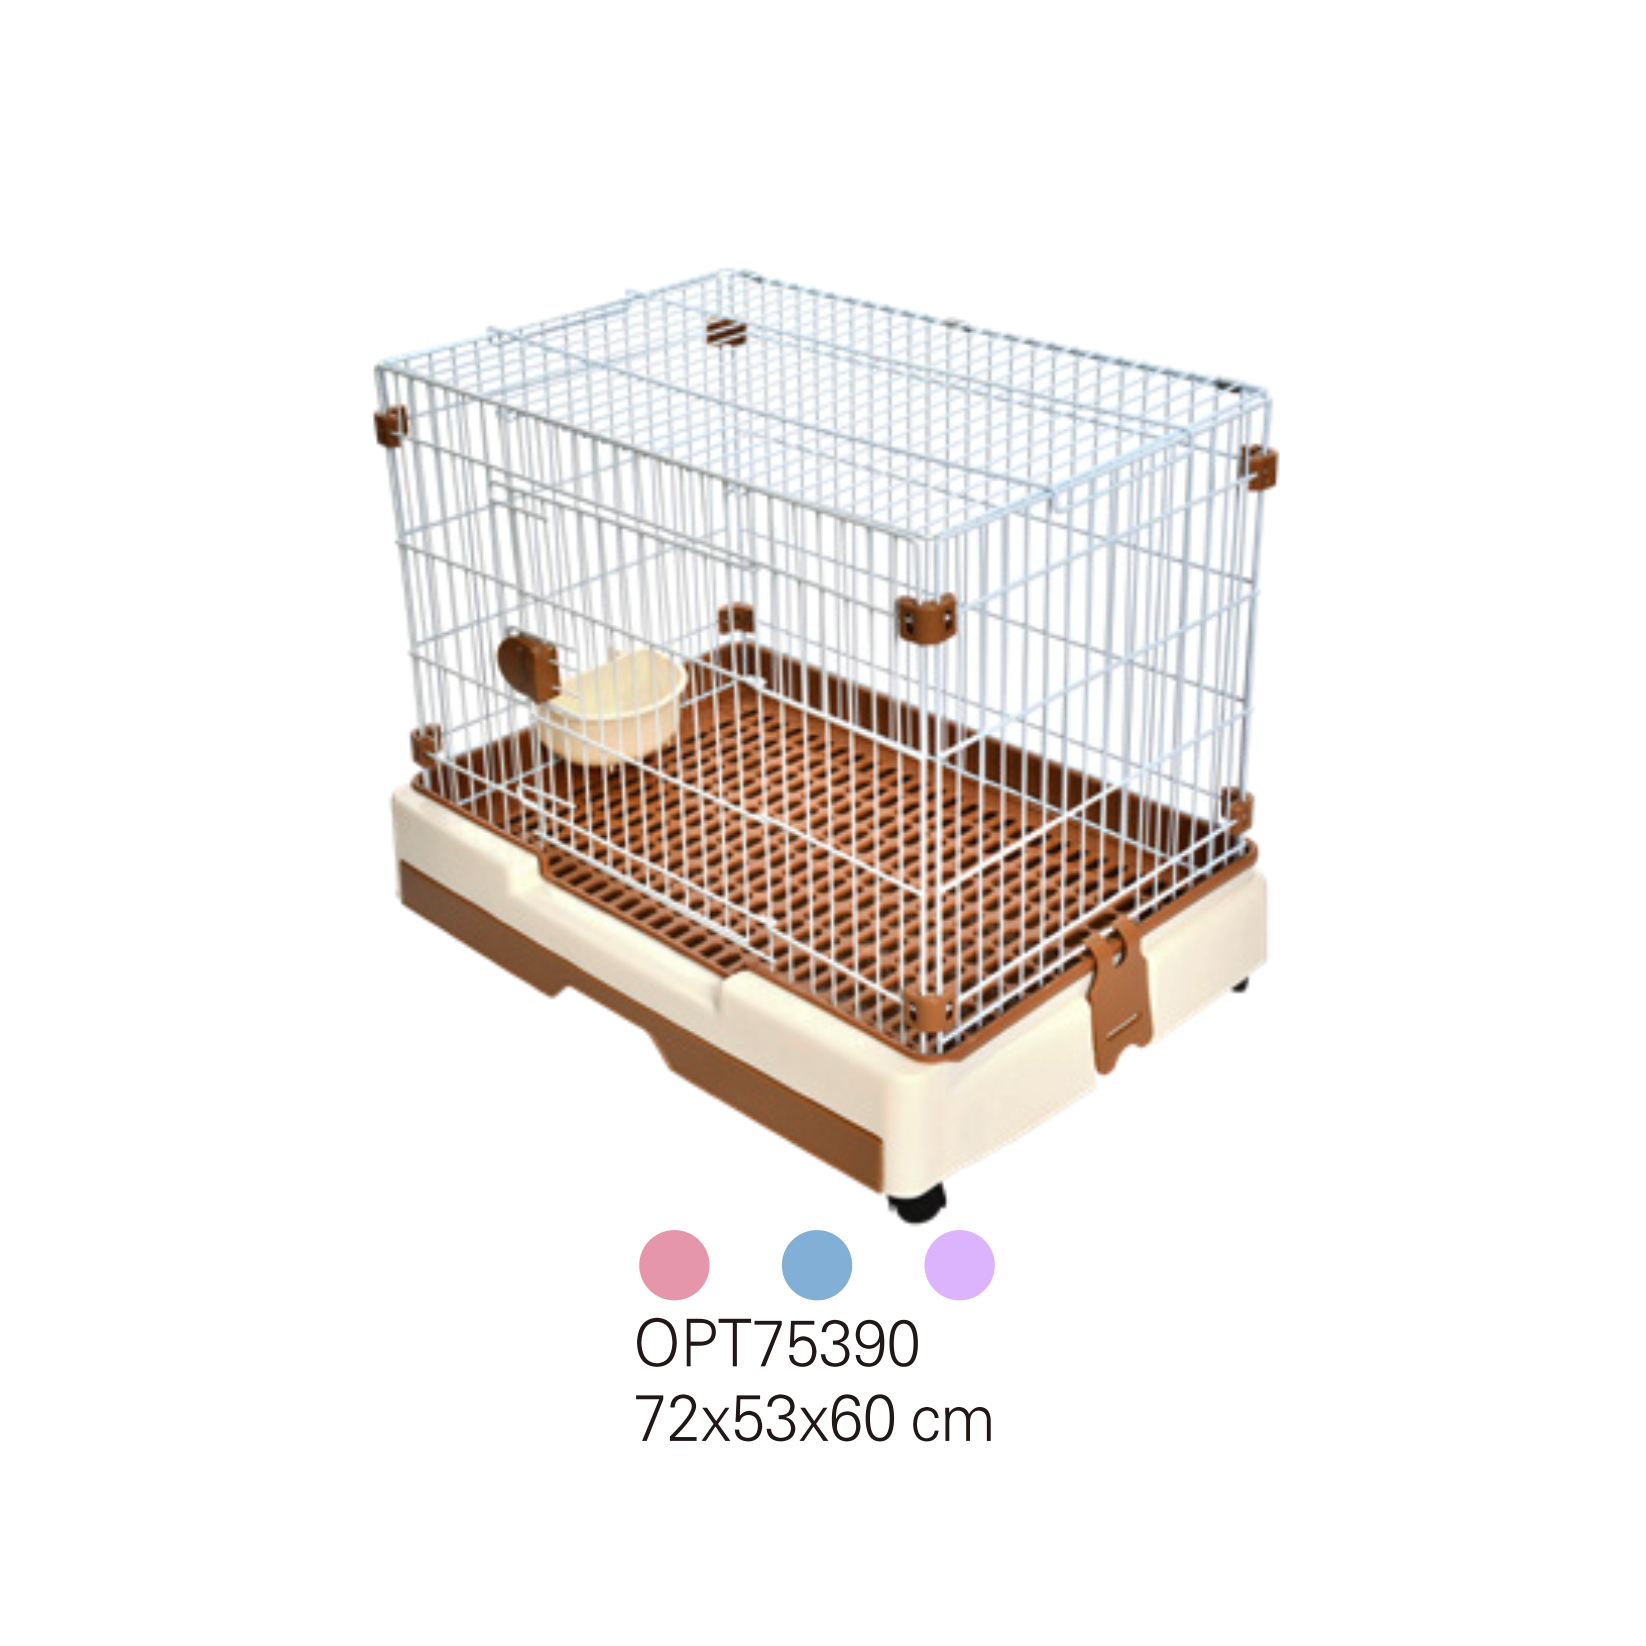 OPT75390 Pet cage